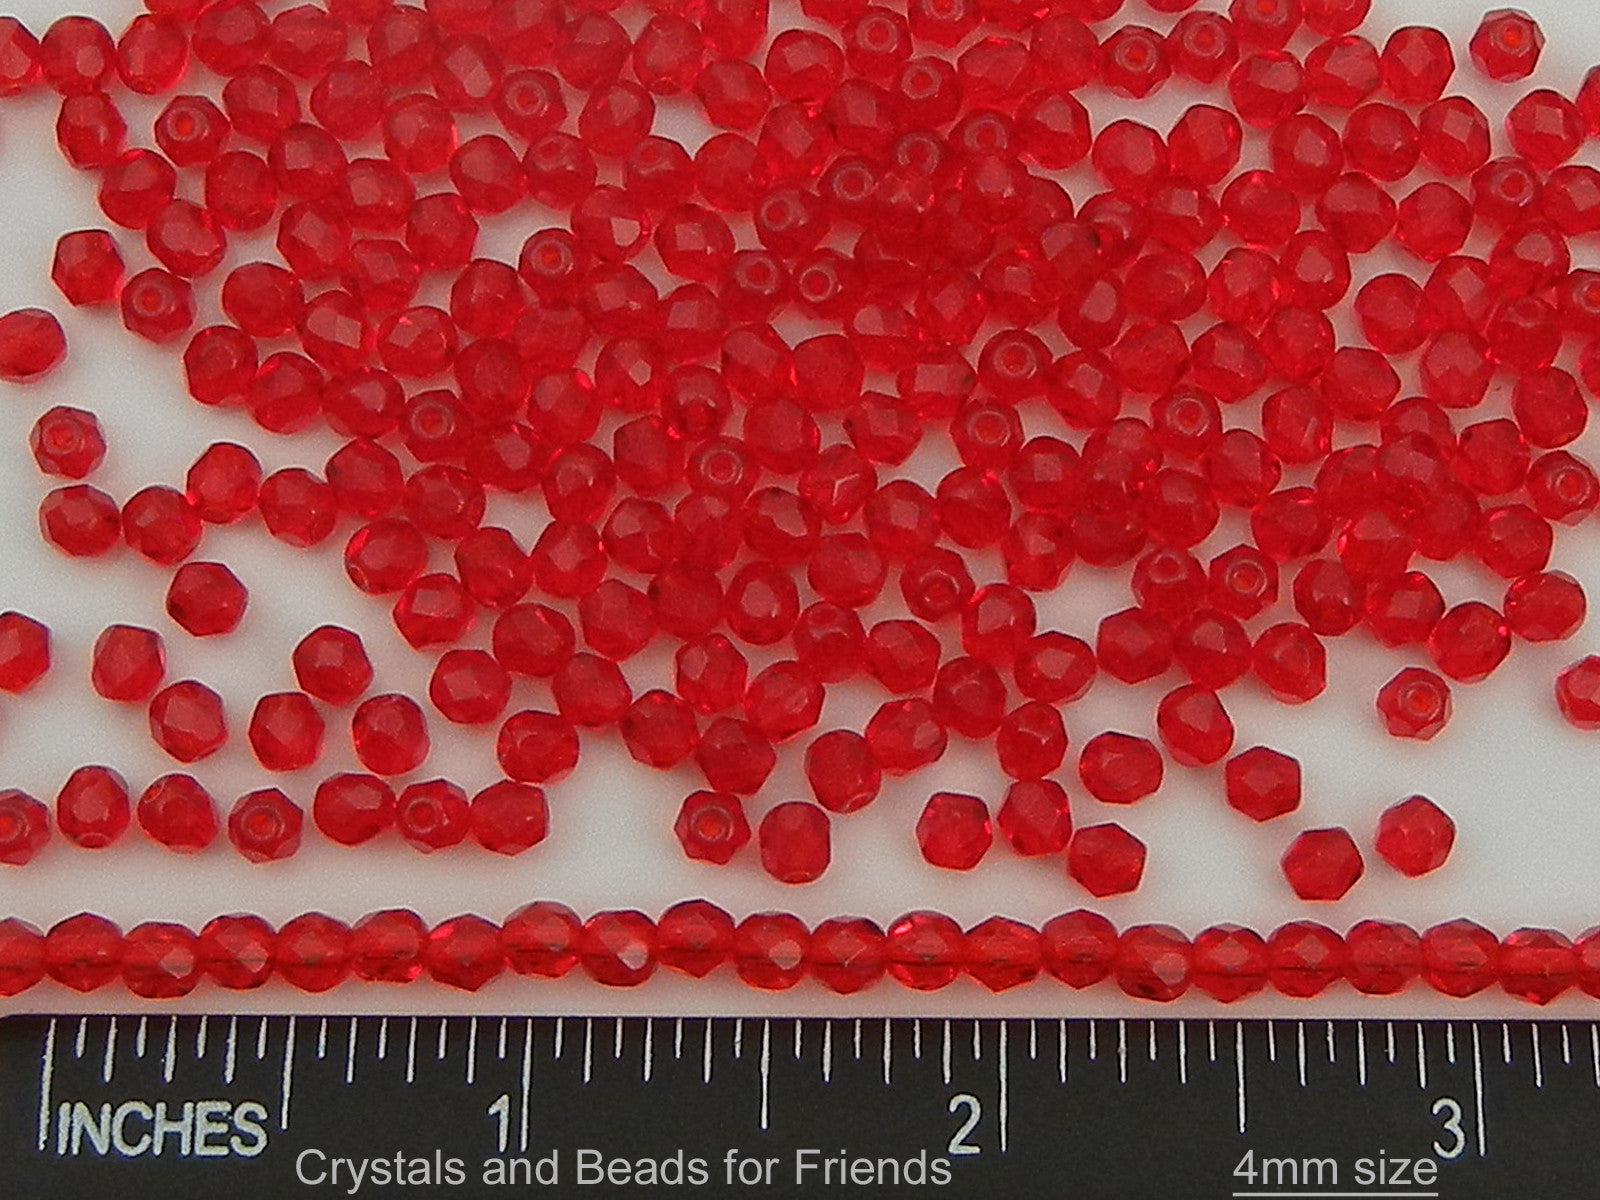 Light Siam, loose Czech Fire Polished Round Faceted Glass Beads, light red, 3mm, 4mm, 6mm, 8mm